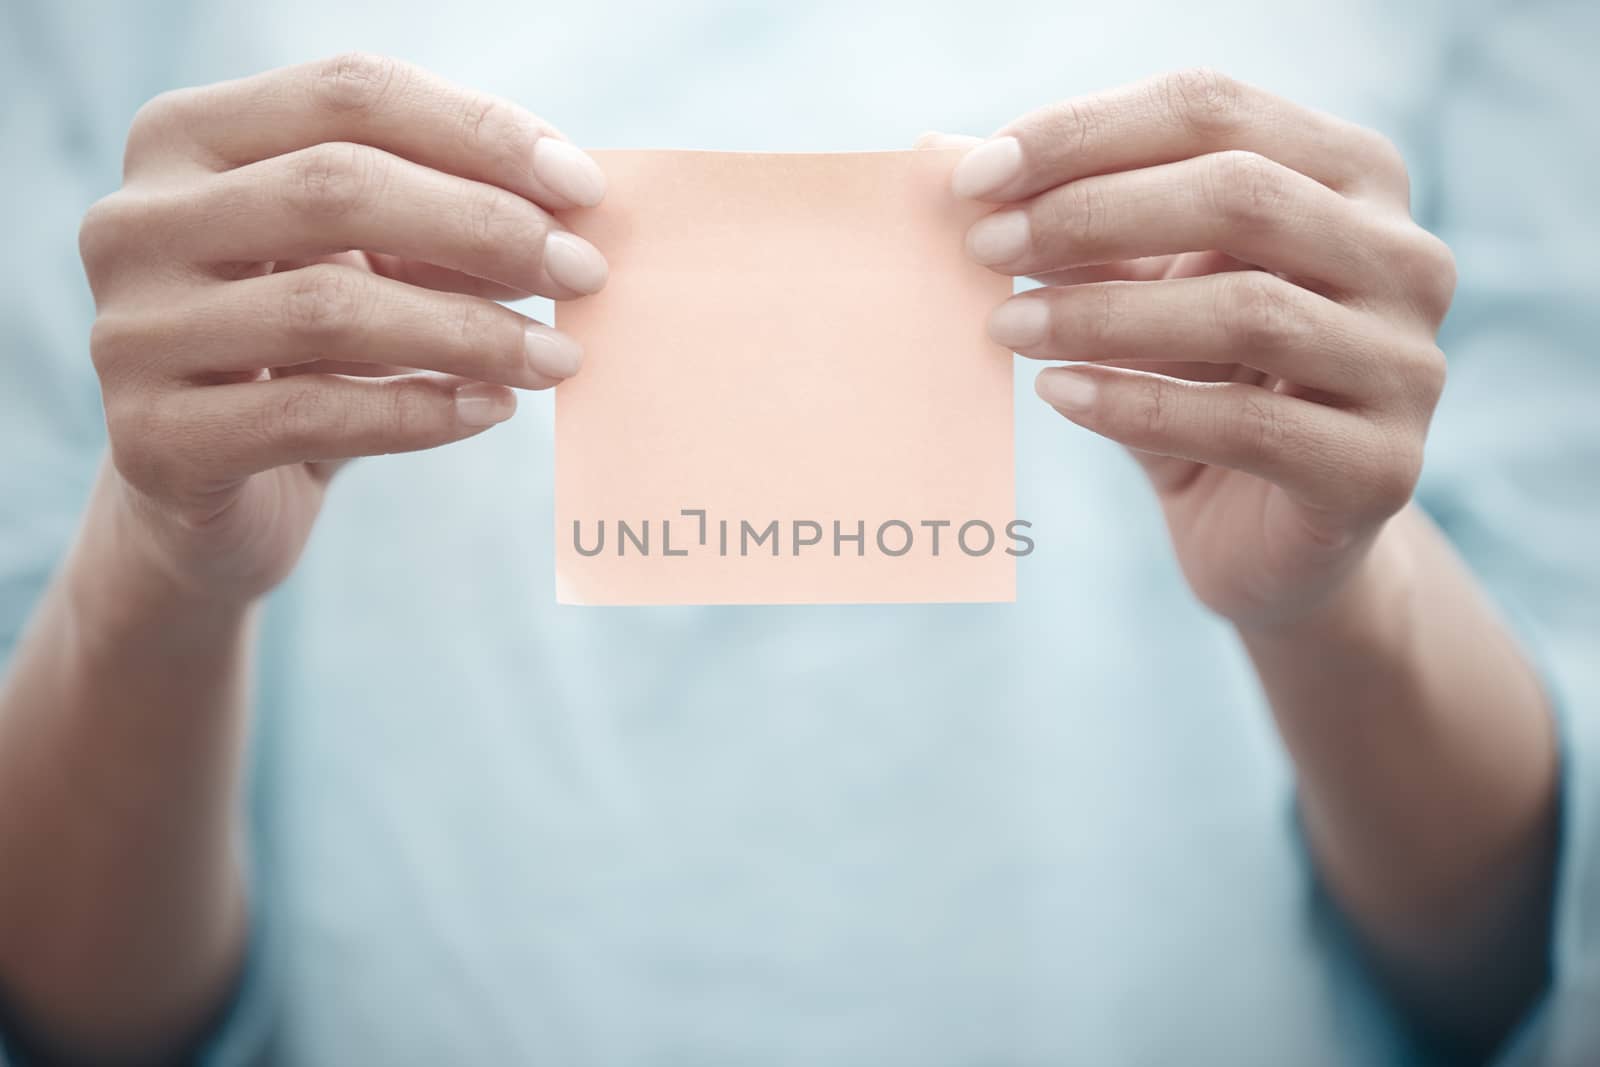 Woman holding adhesive note